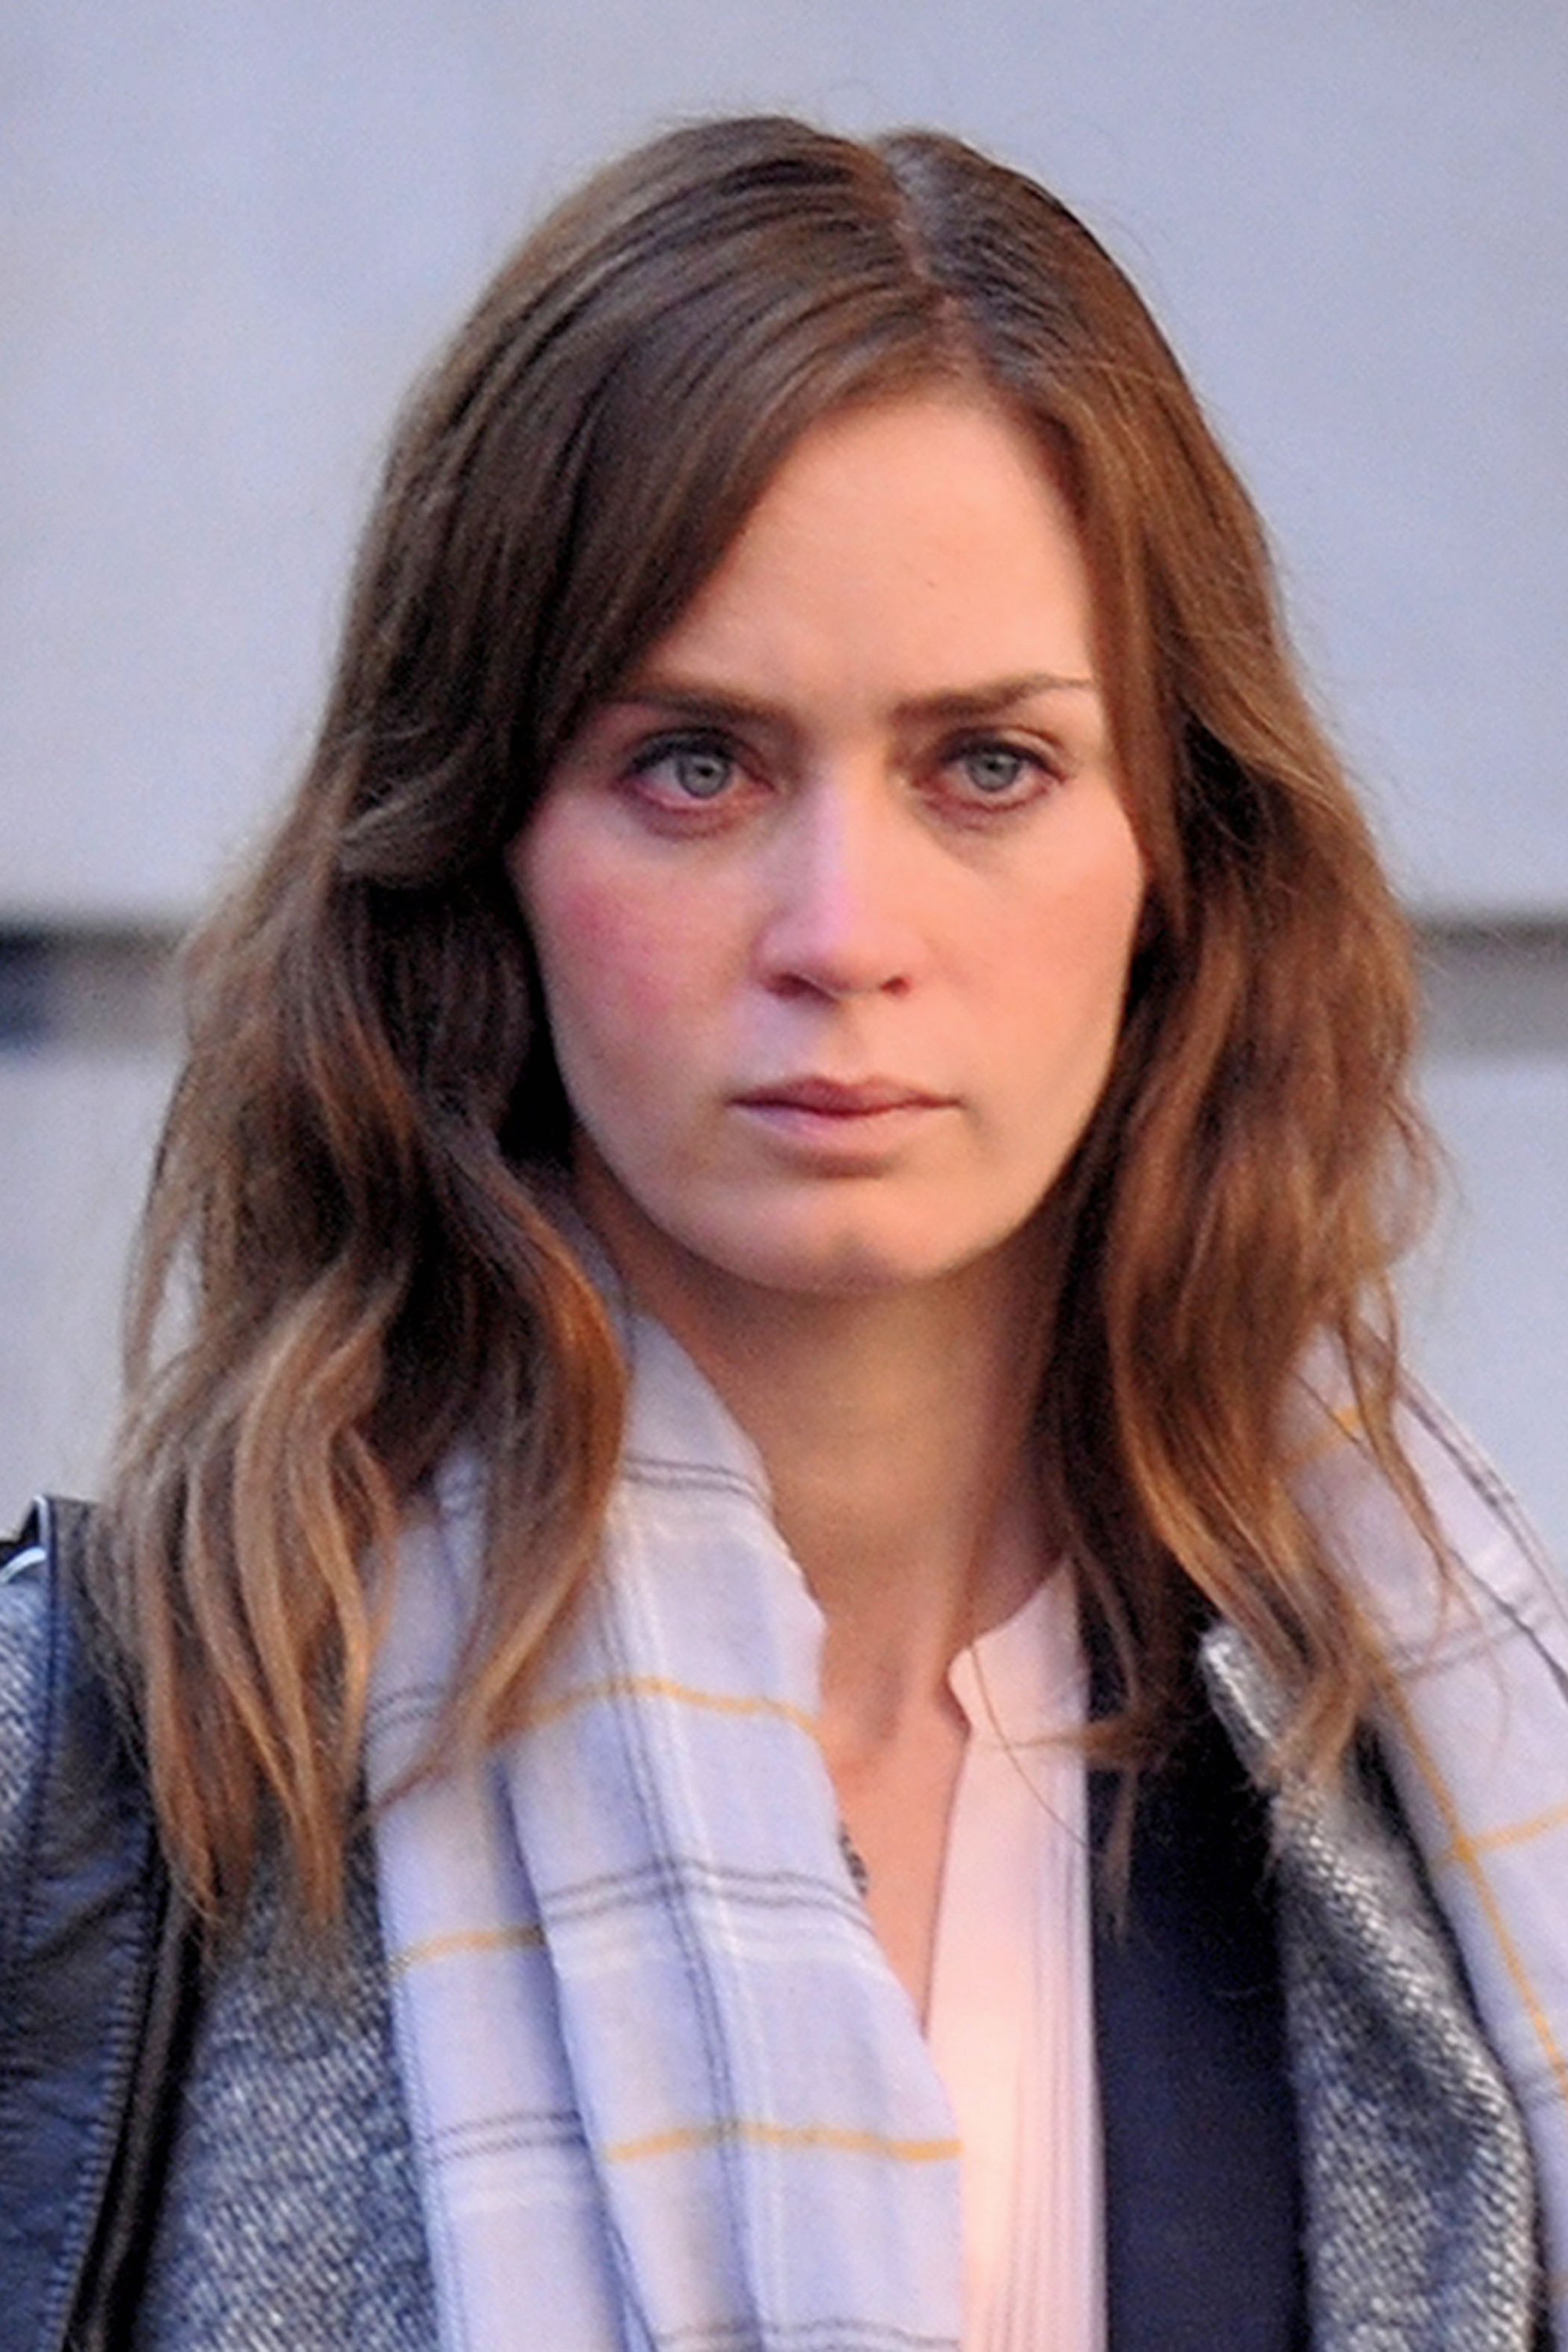 emily-blunt-the-girl-on-the-train-on-set-026.jpg